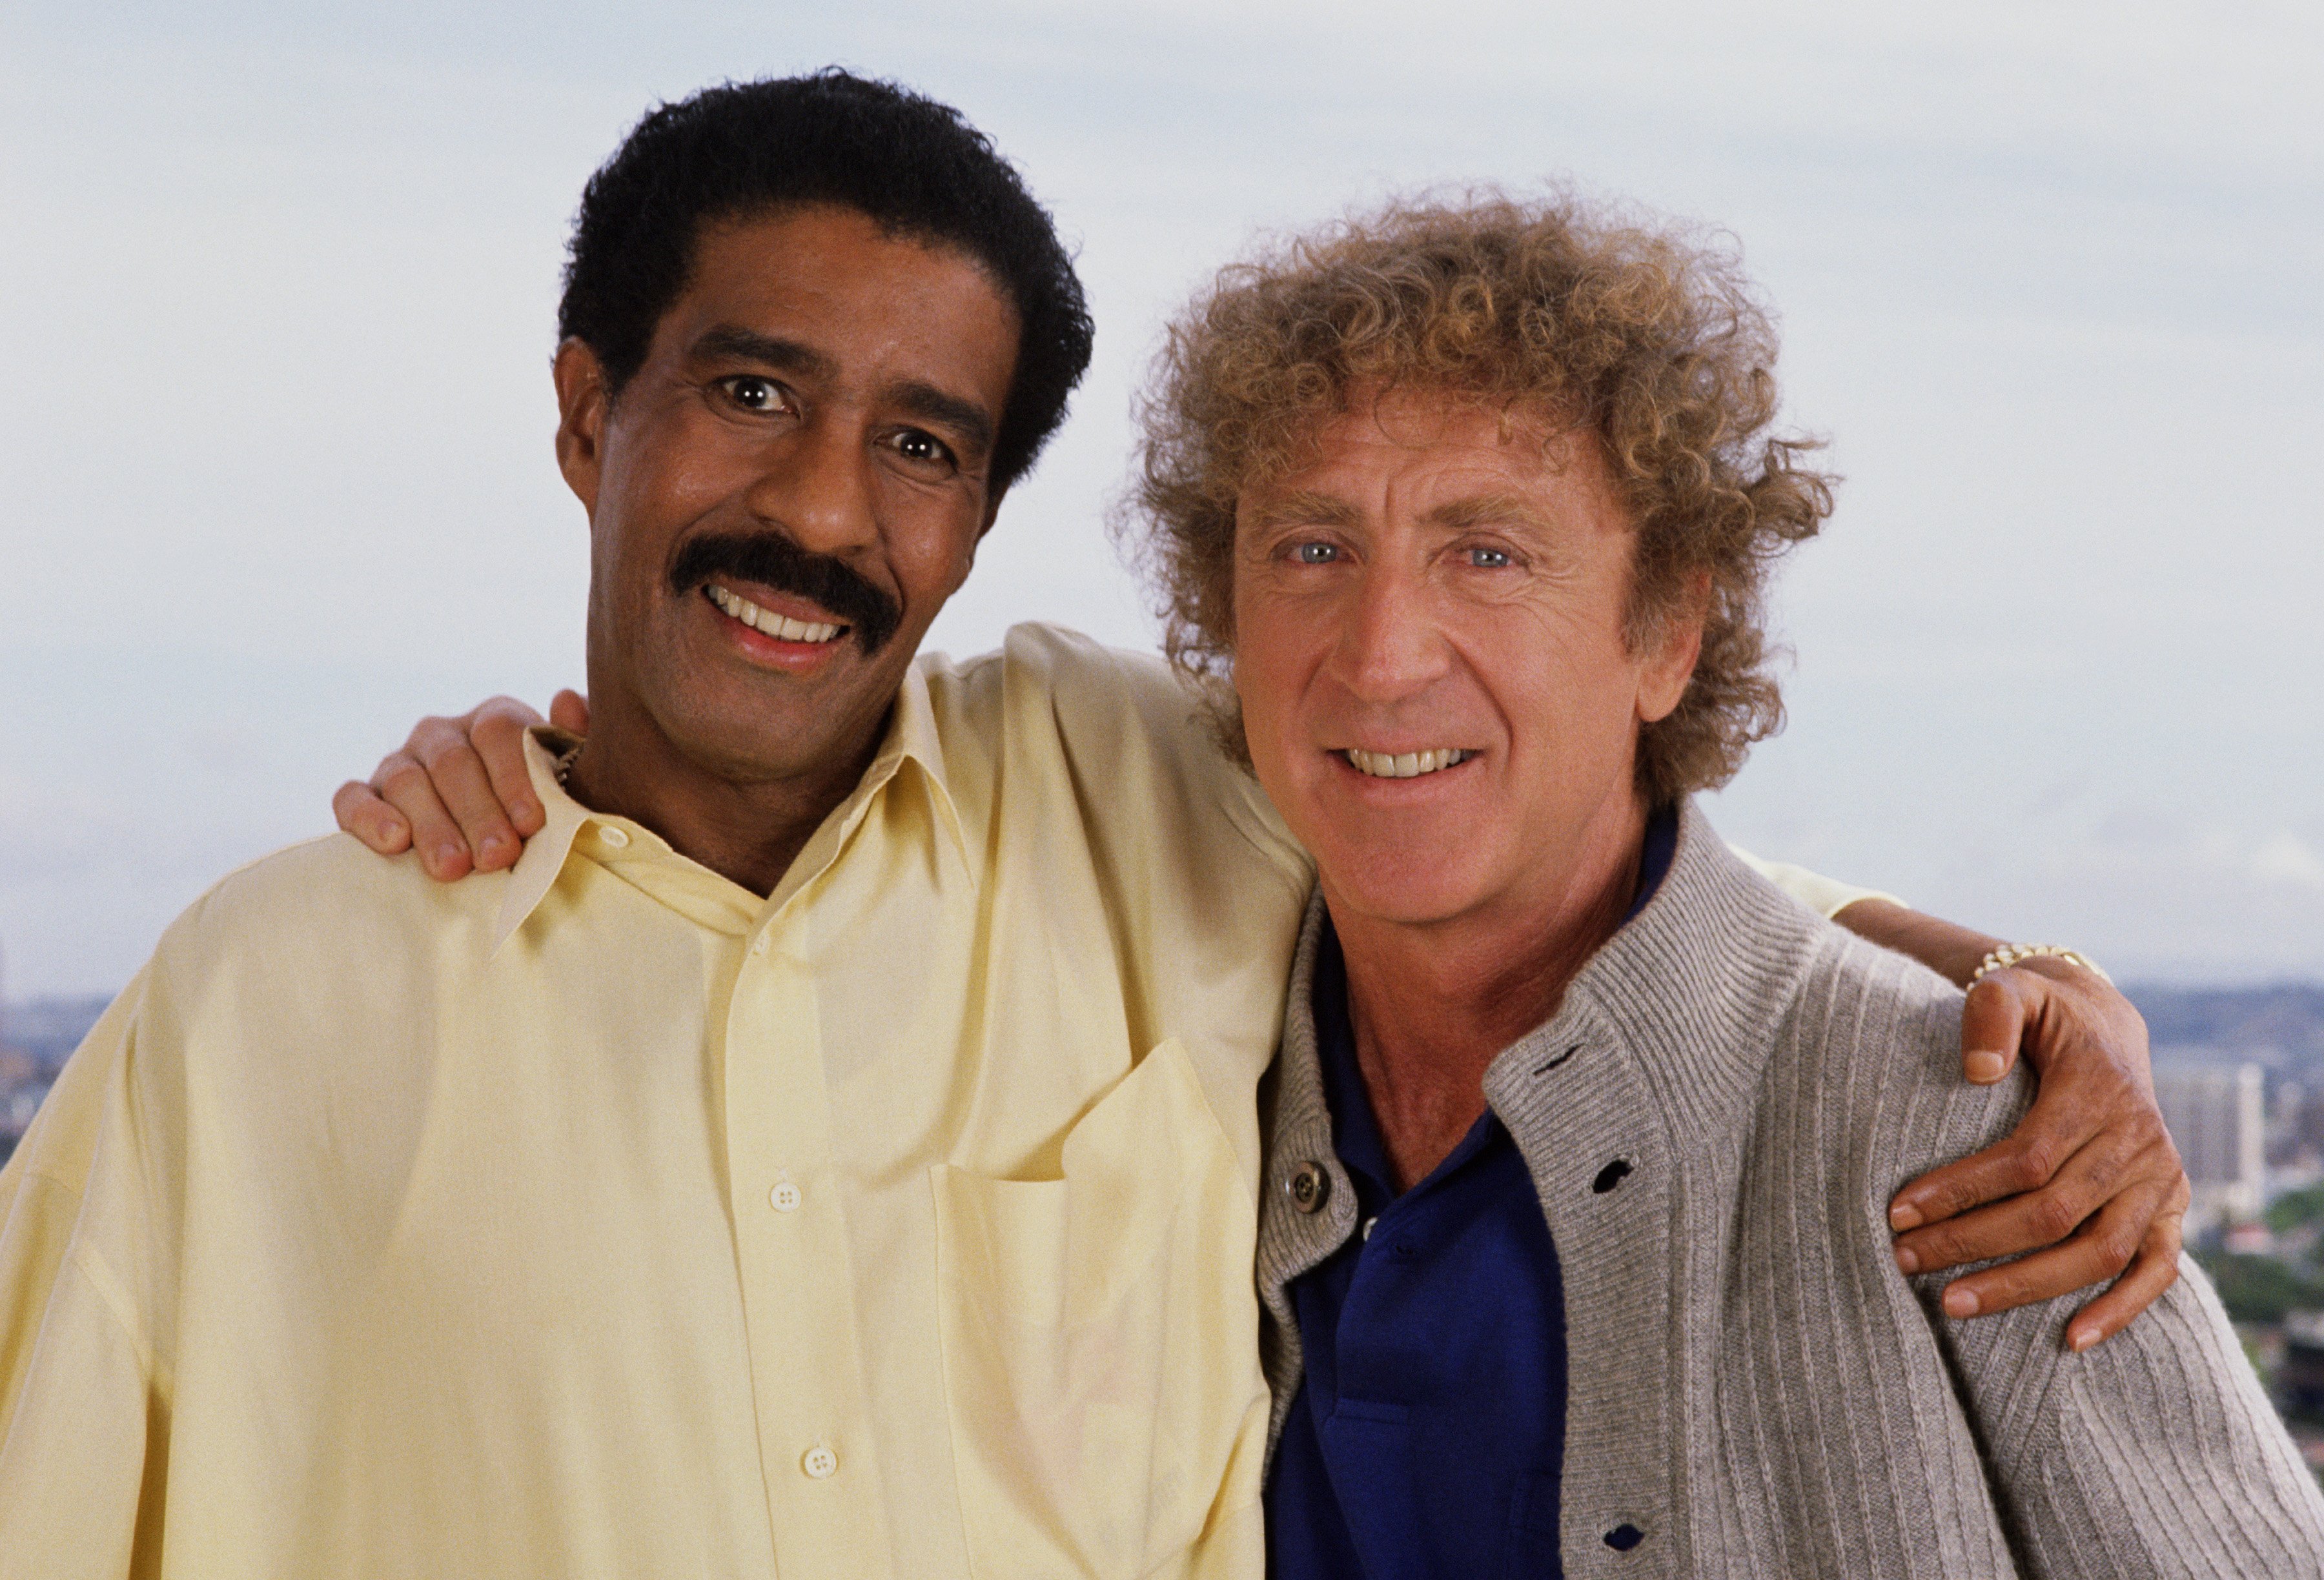 Richard Pryor and Gene Wilder in Hollywood, California, in 1989 | Source: Getty Images 